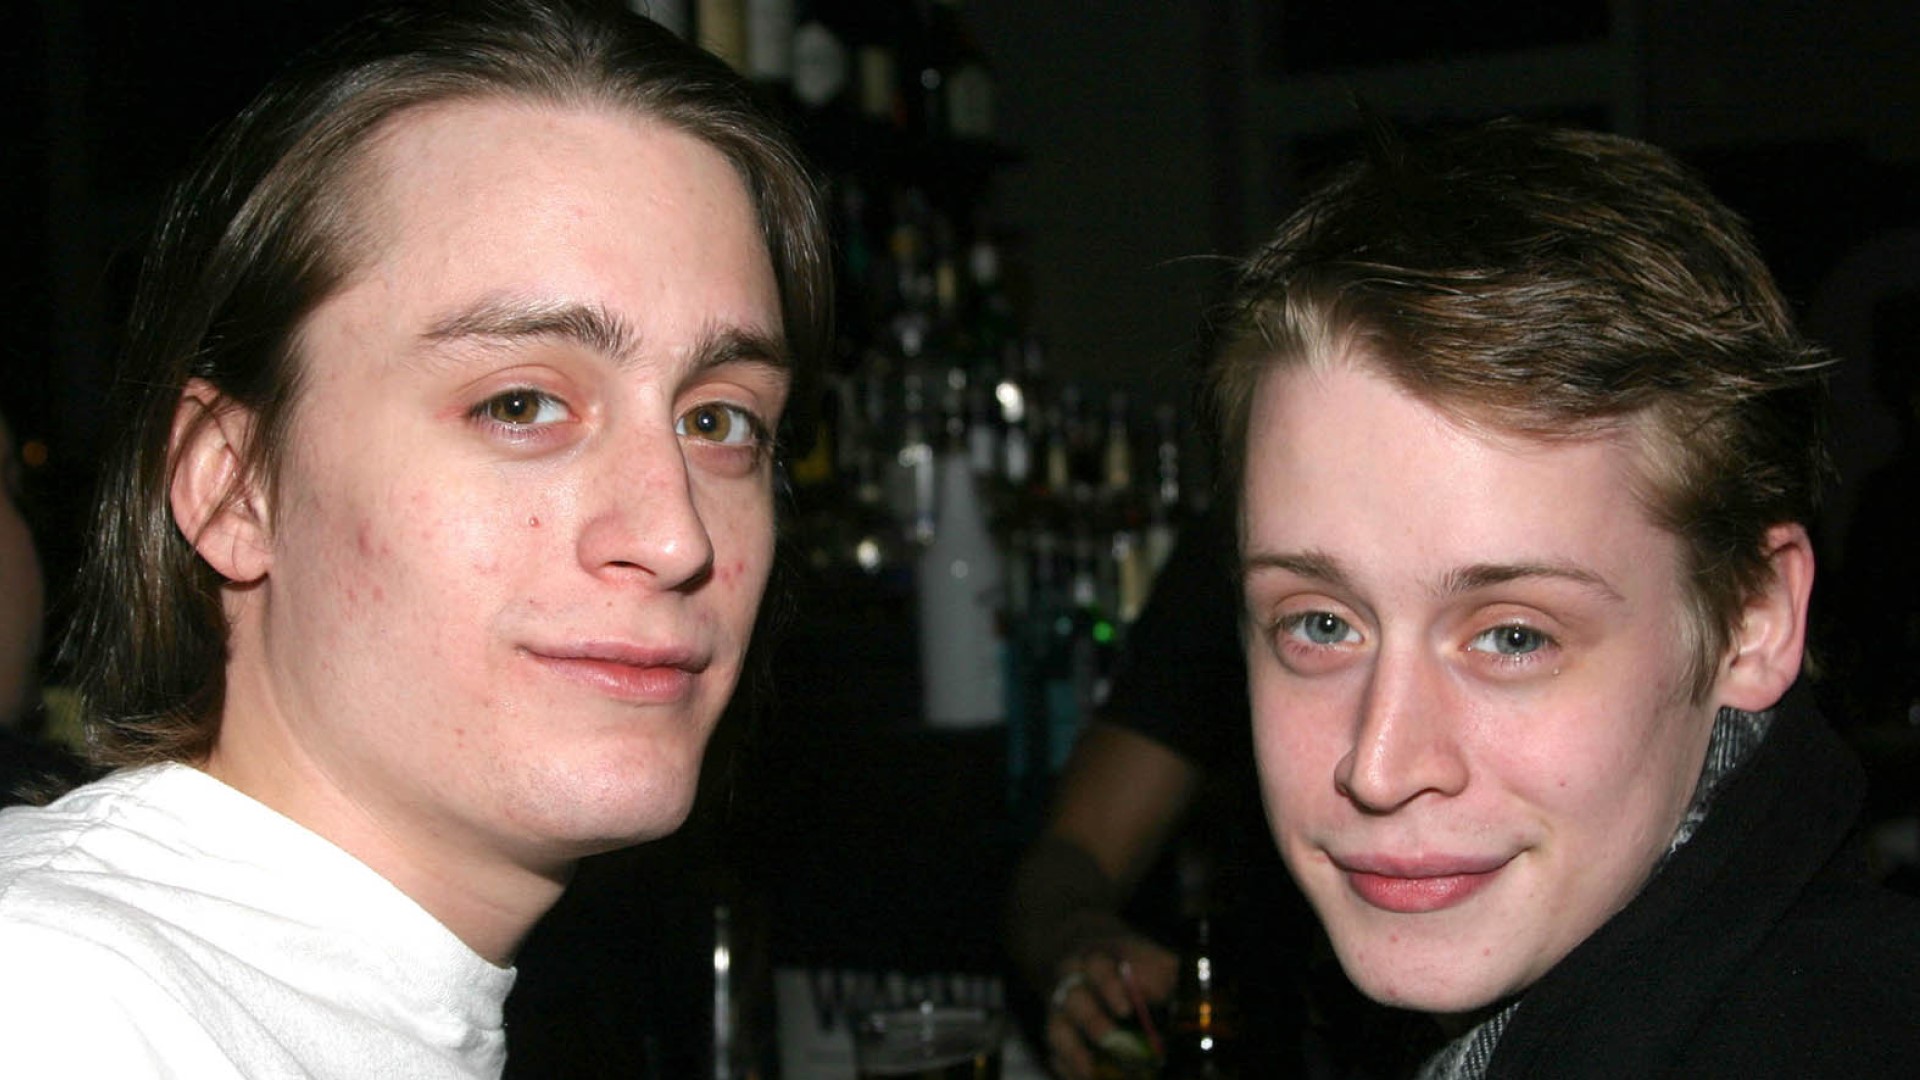 <p>When we hear the Culkin last name, the person that inevitably comes to mind is Macaulay Culkin. The New York actor became a mass phenomenon at just 10 years old, and years later, he lived a controversial and mediatic family drama. However, in the Culkin family, there's more than just Macaulay… What do we know about his parents and siblings?</p>